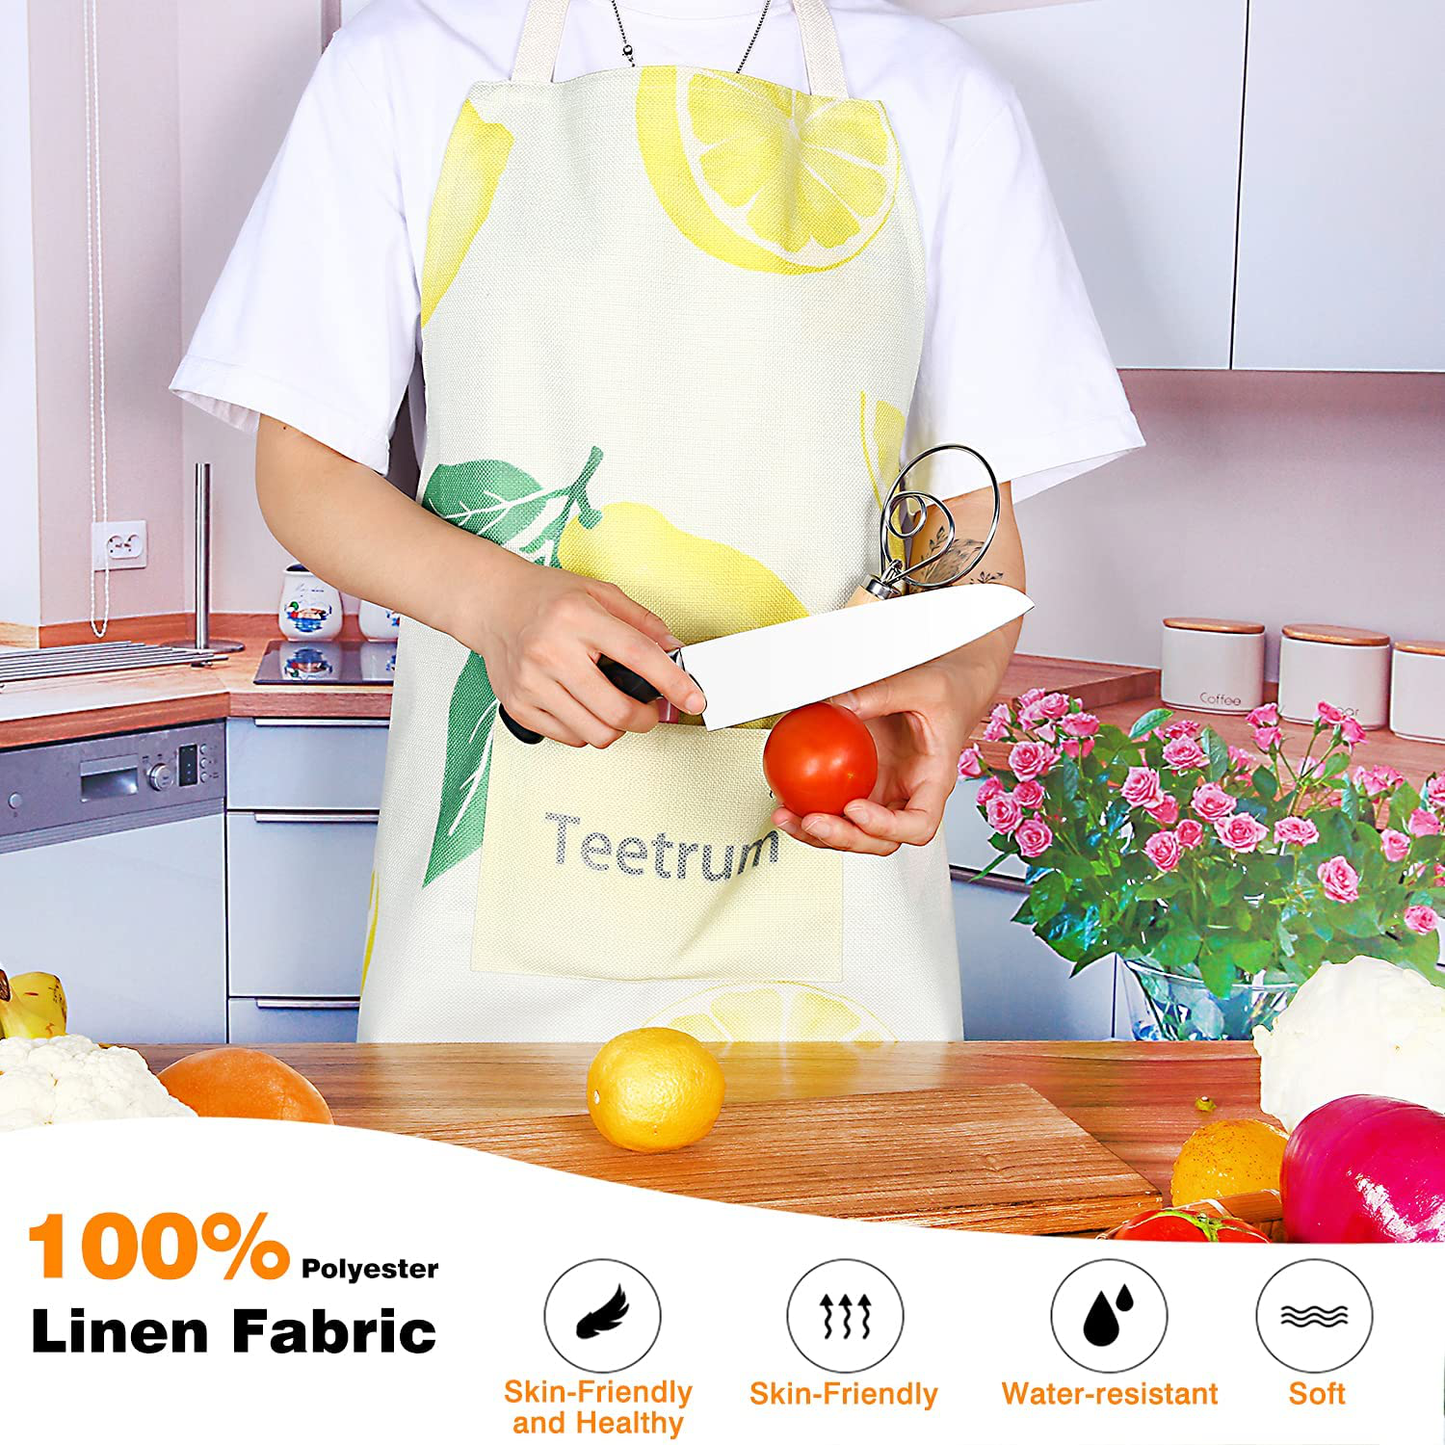 Cute Cooking Aprons with Pockets for Women Men Chef Adults Waterproof Kitchen Bib Apron for Baking Work Shop